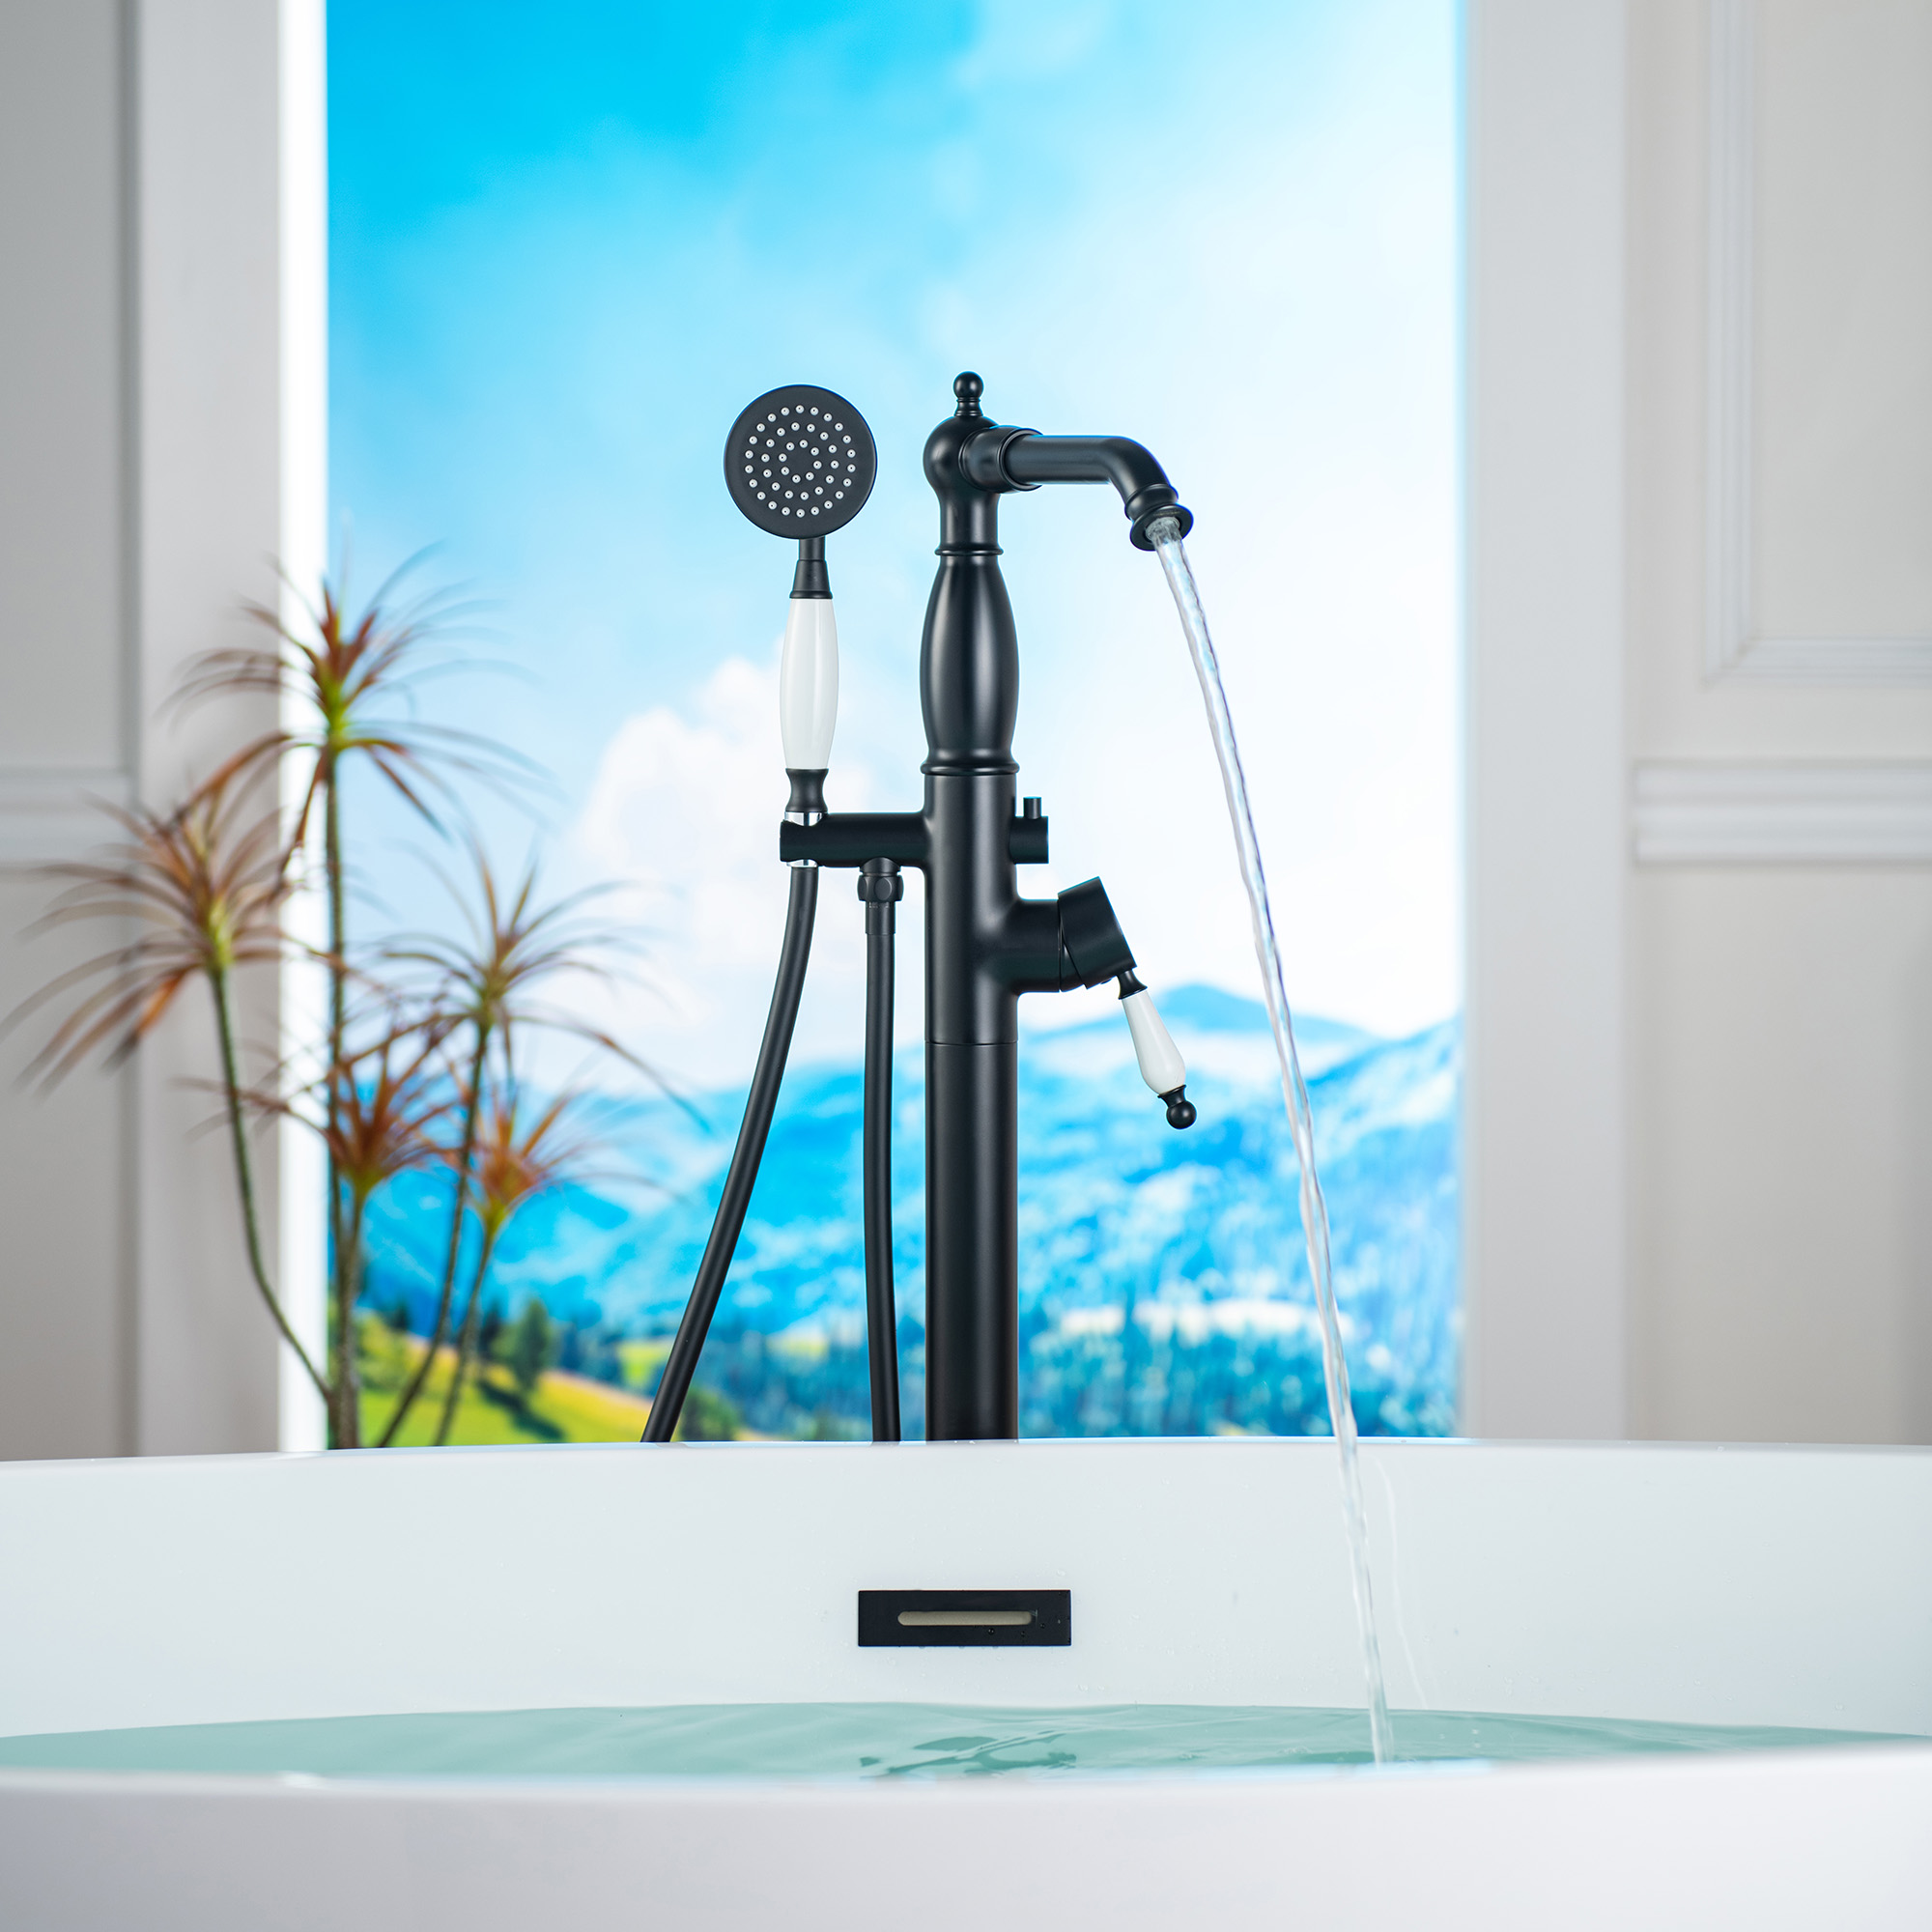  WOODBRIDGE F0048MB Fusion Single Handle Floor Mount Freestanding Tub Filler Faucet with Telephone Hand shower in Matte Black Finish_12264